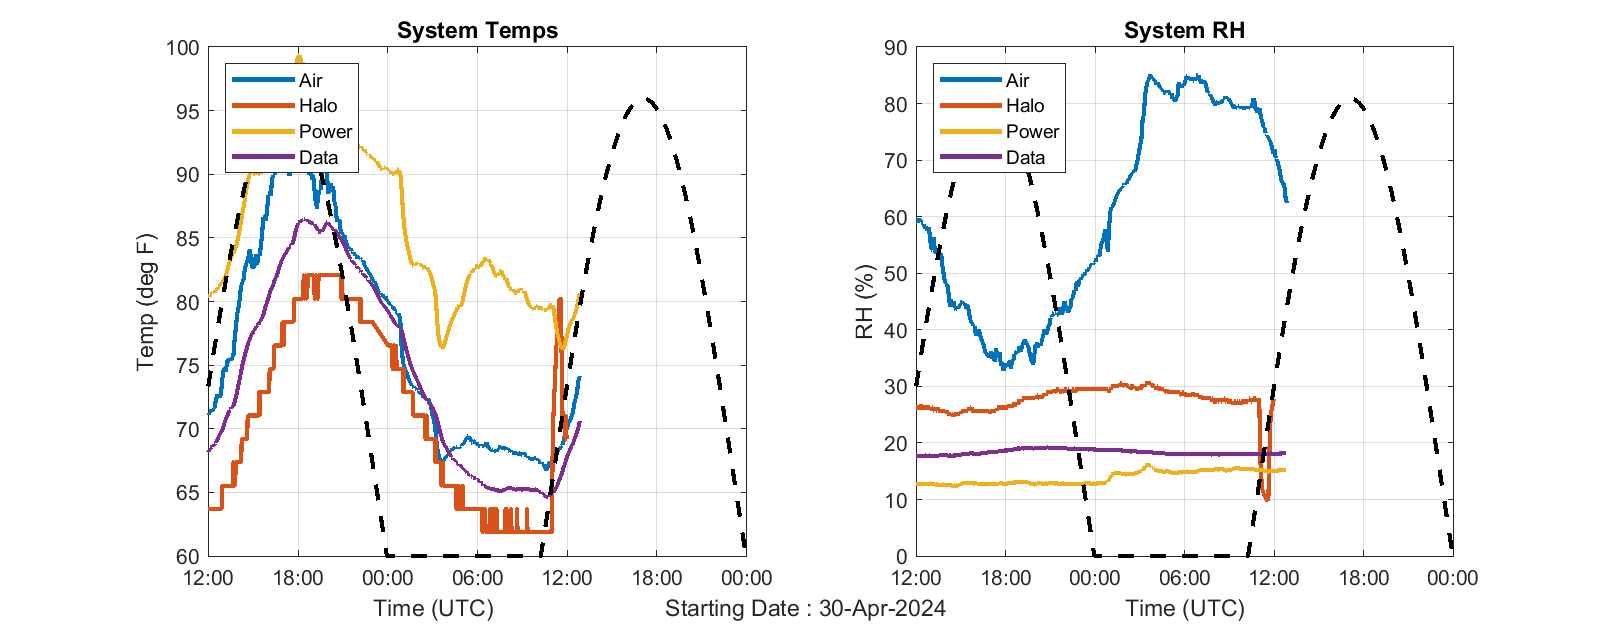 systems temps